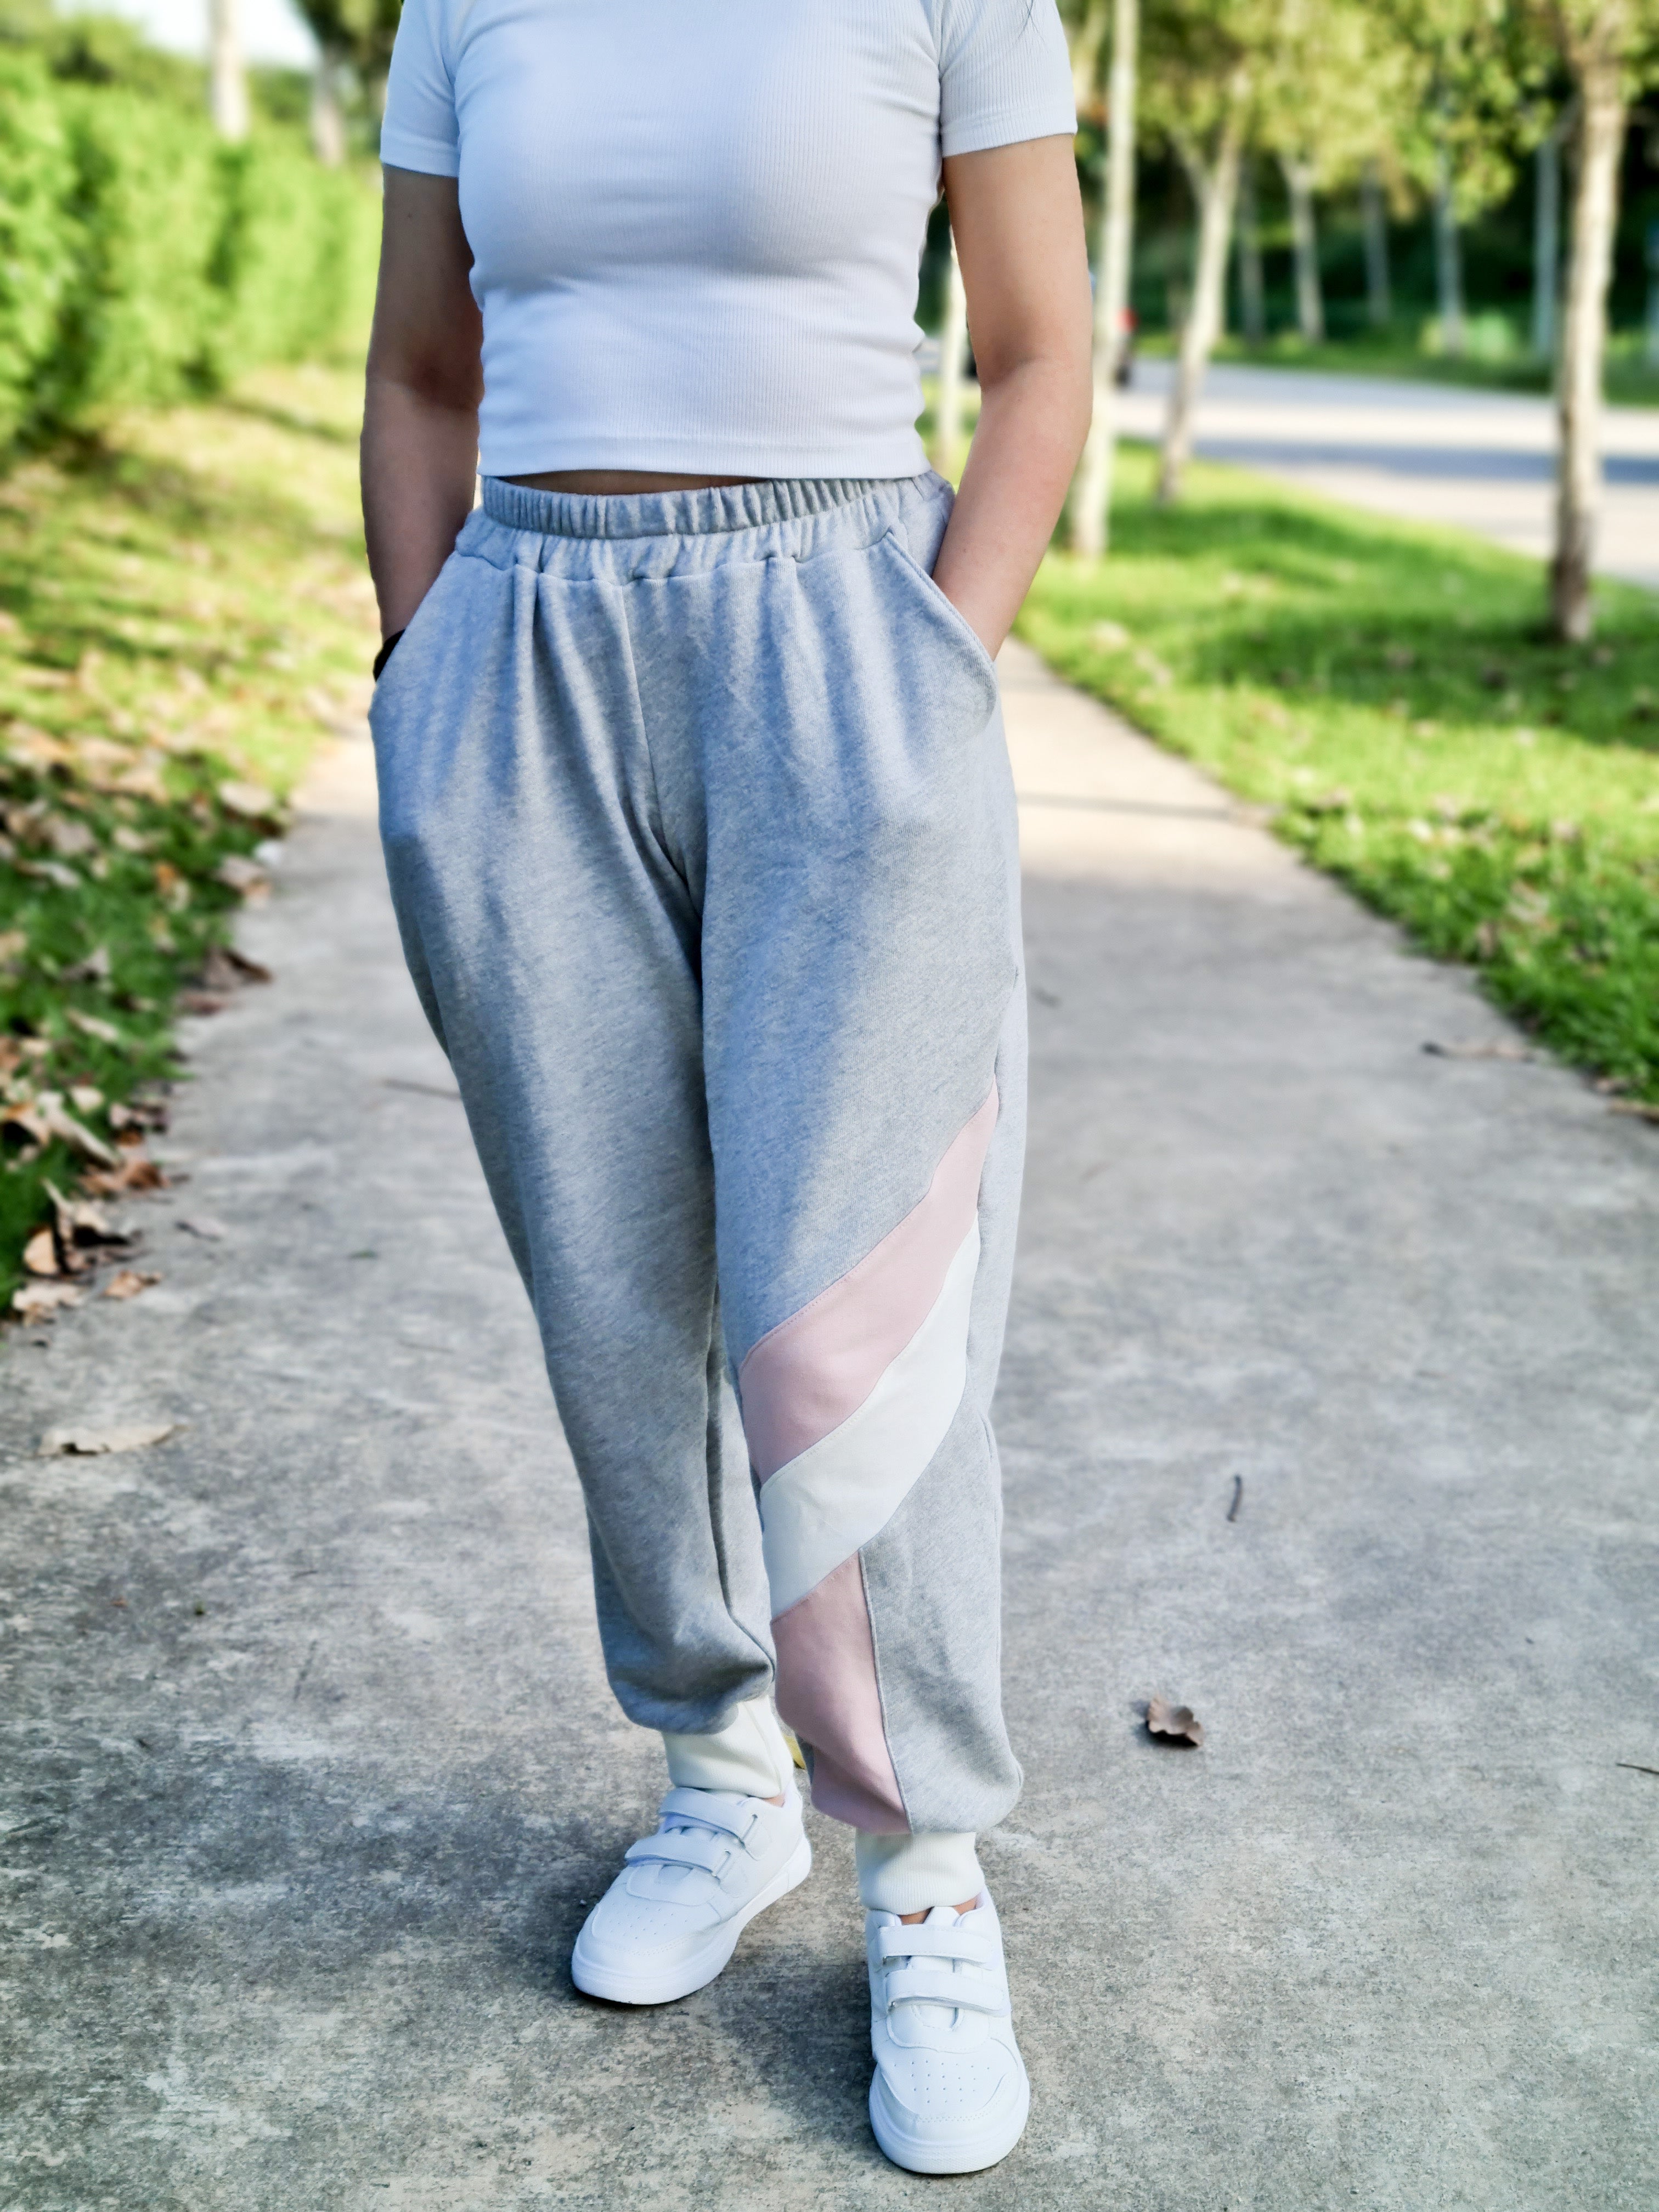 jogger sweatpant outfit